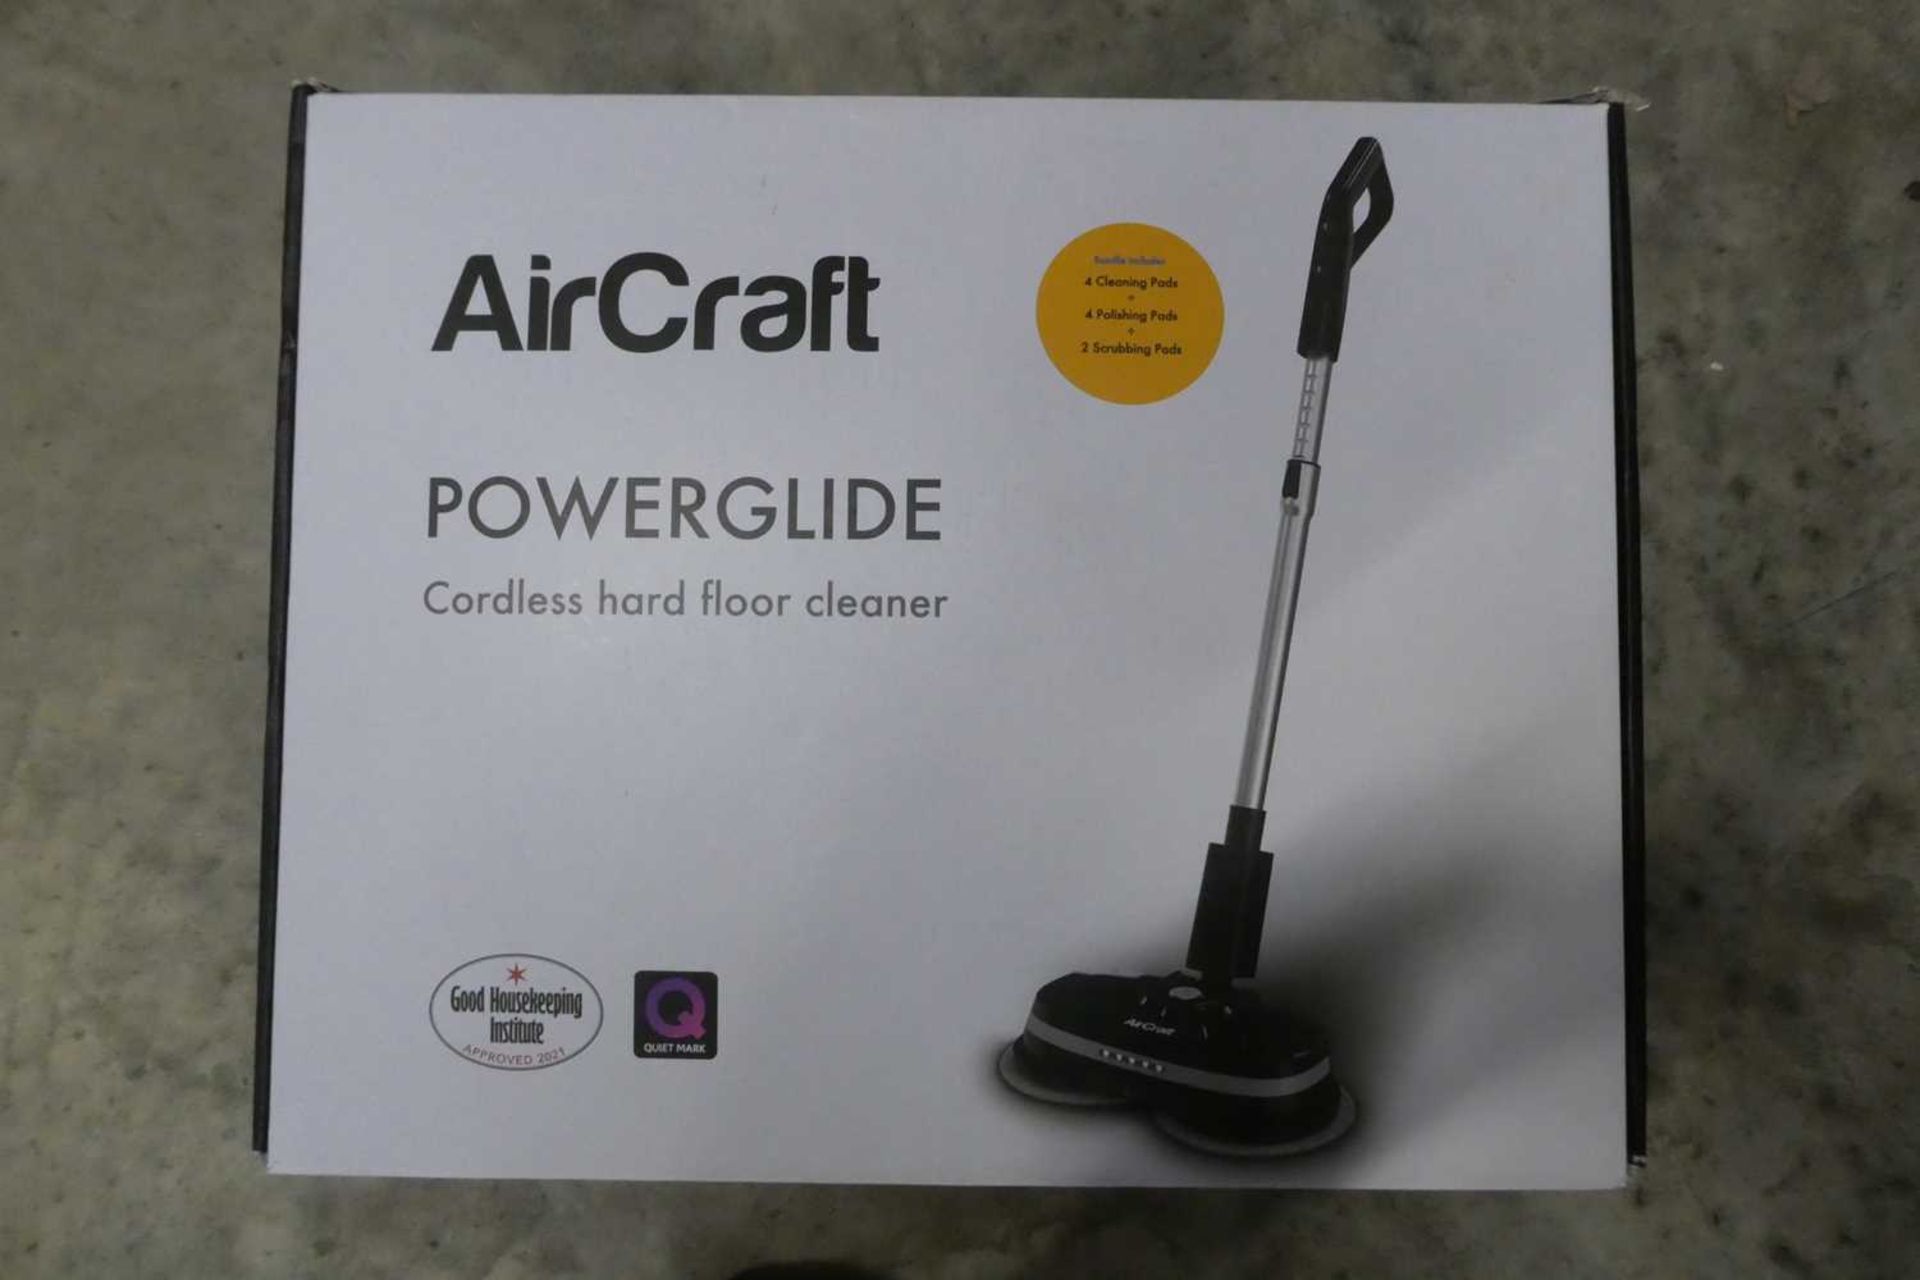 +VAT Boxed Aircraft power glide cordless hard floor cleaner and buffer